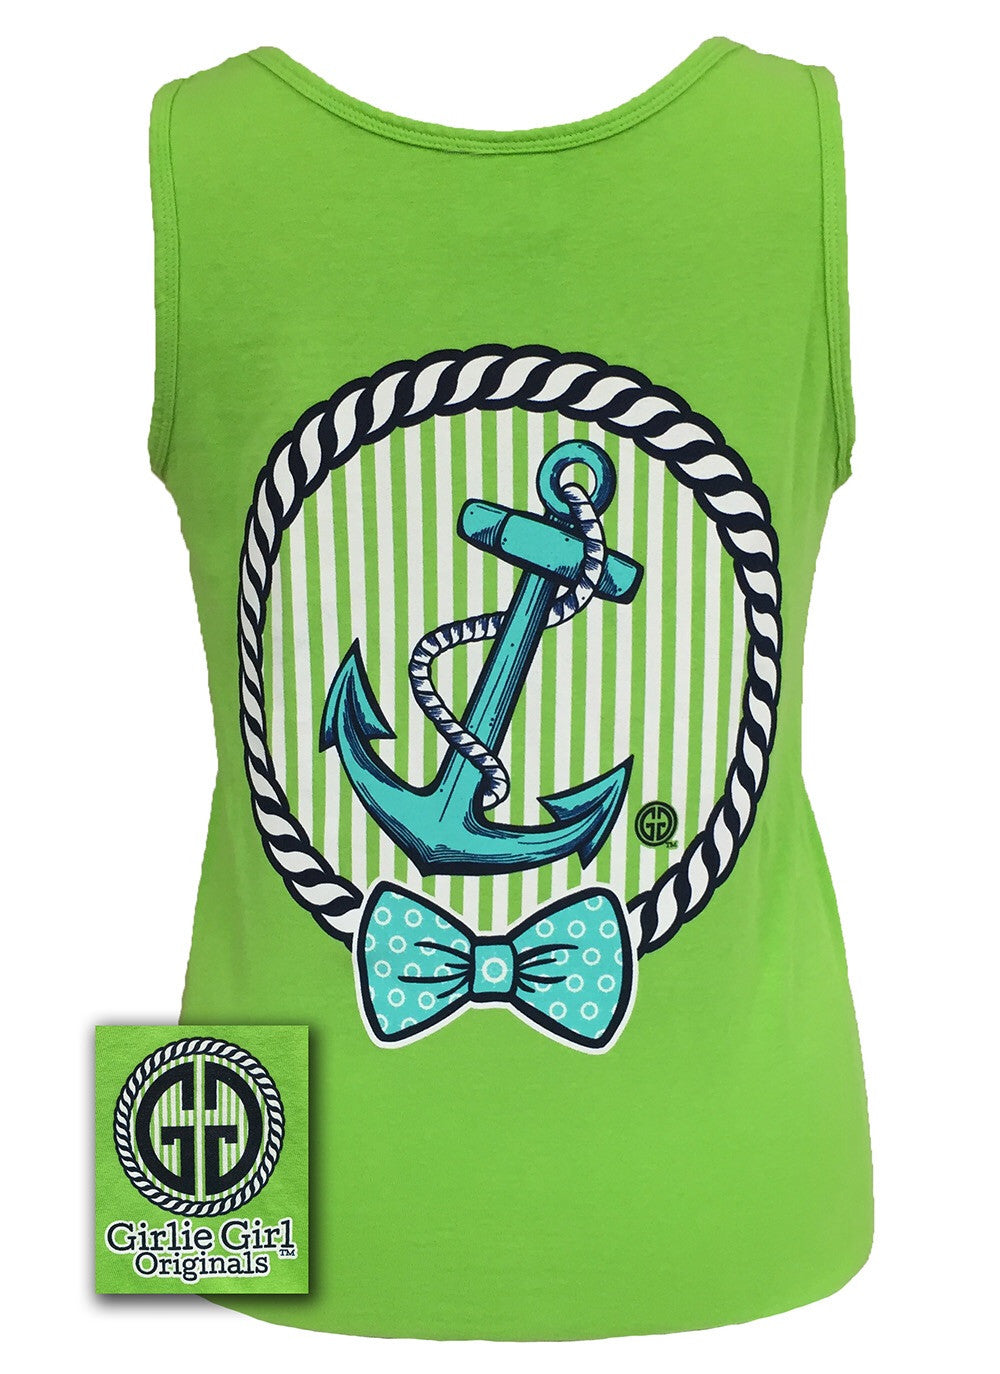 Girlie Girl Originals Collection Anchor Bow Logo Bright Comfort Colors Lime Tank Top Shirt - SimplyCuteTees